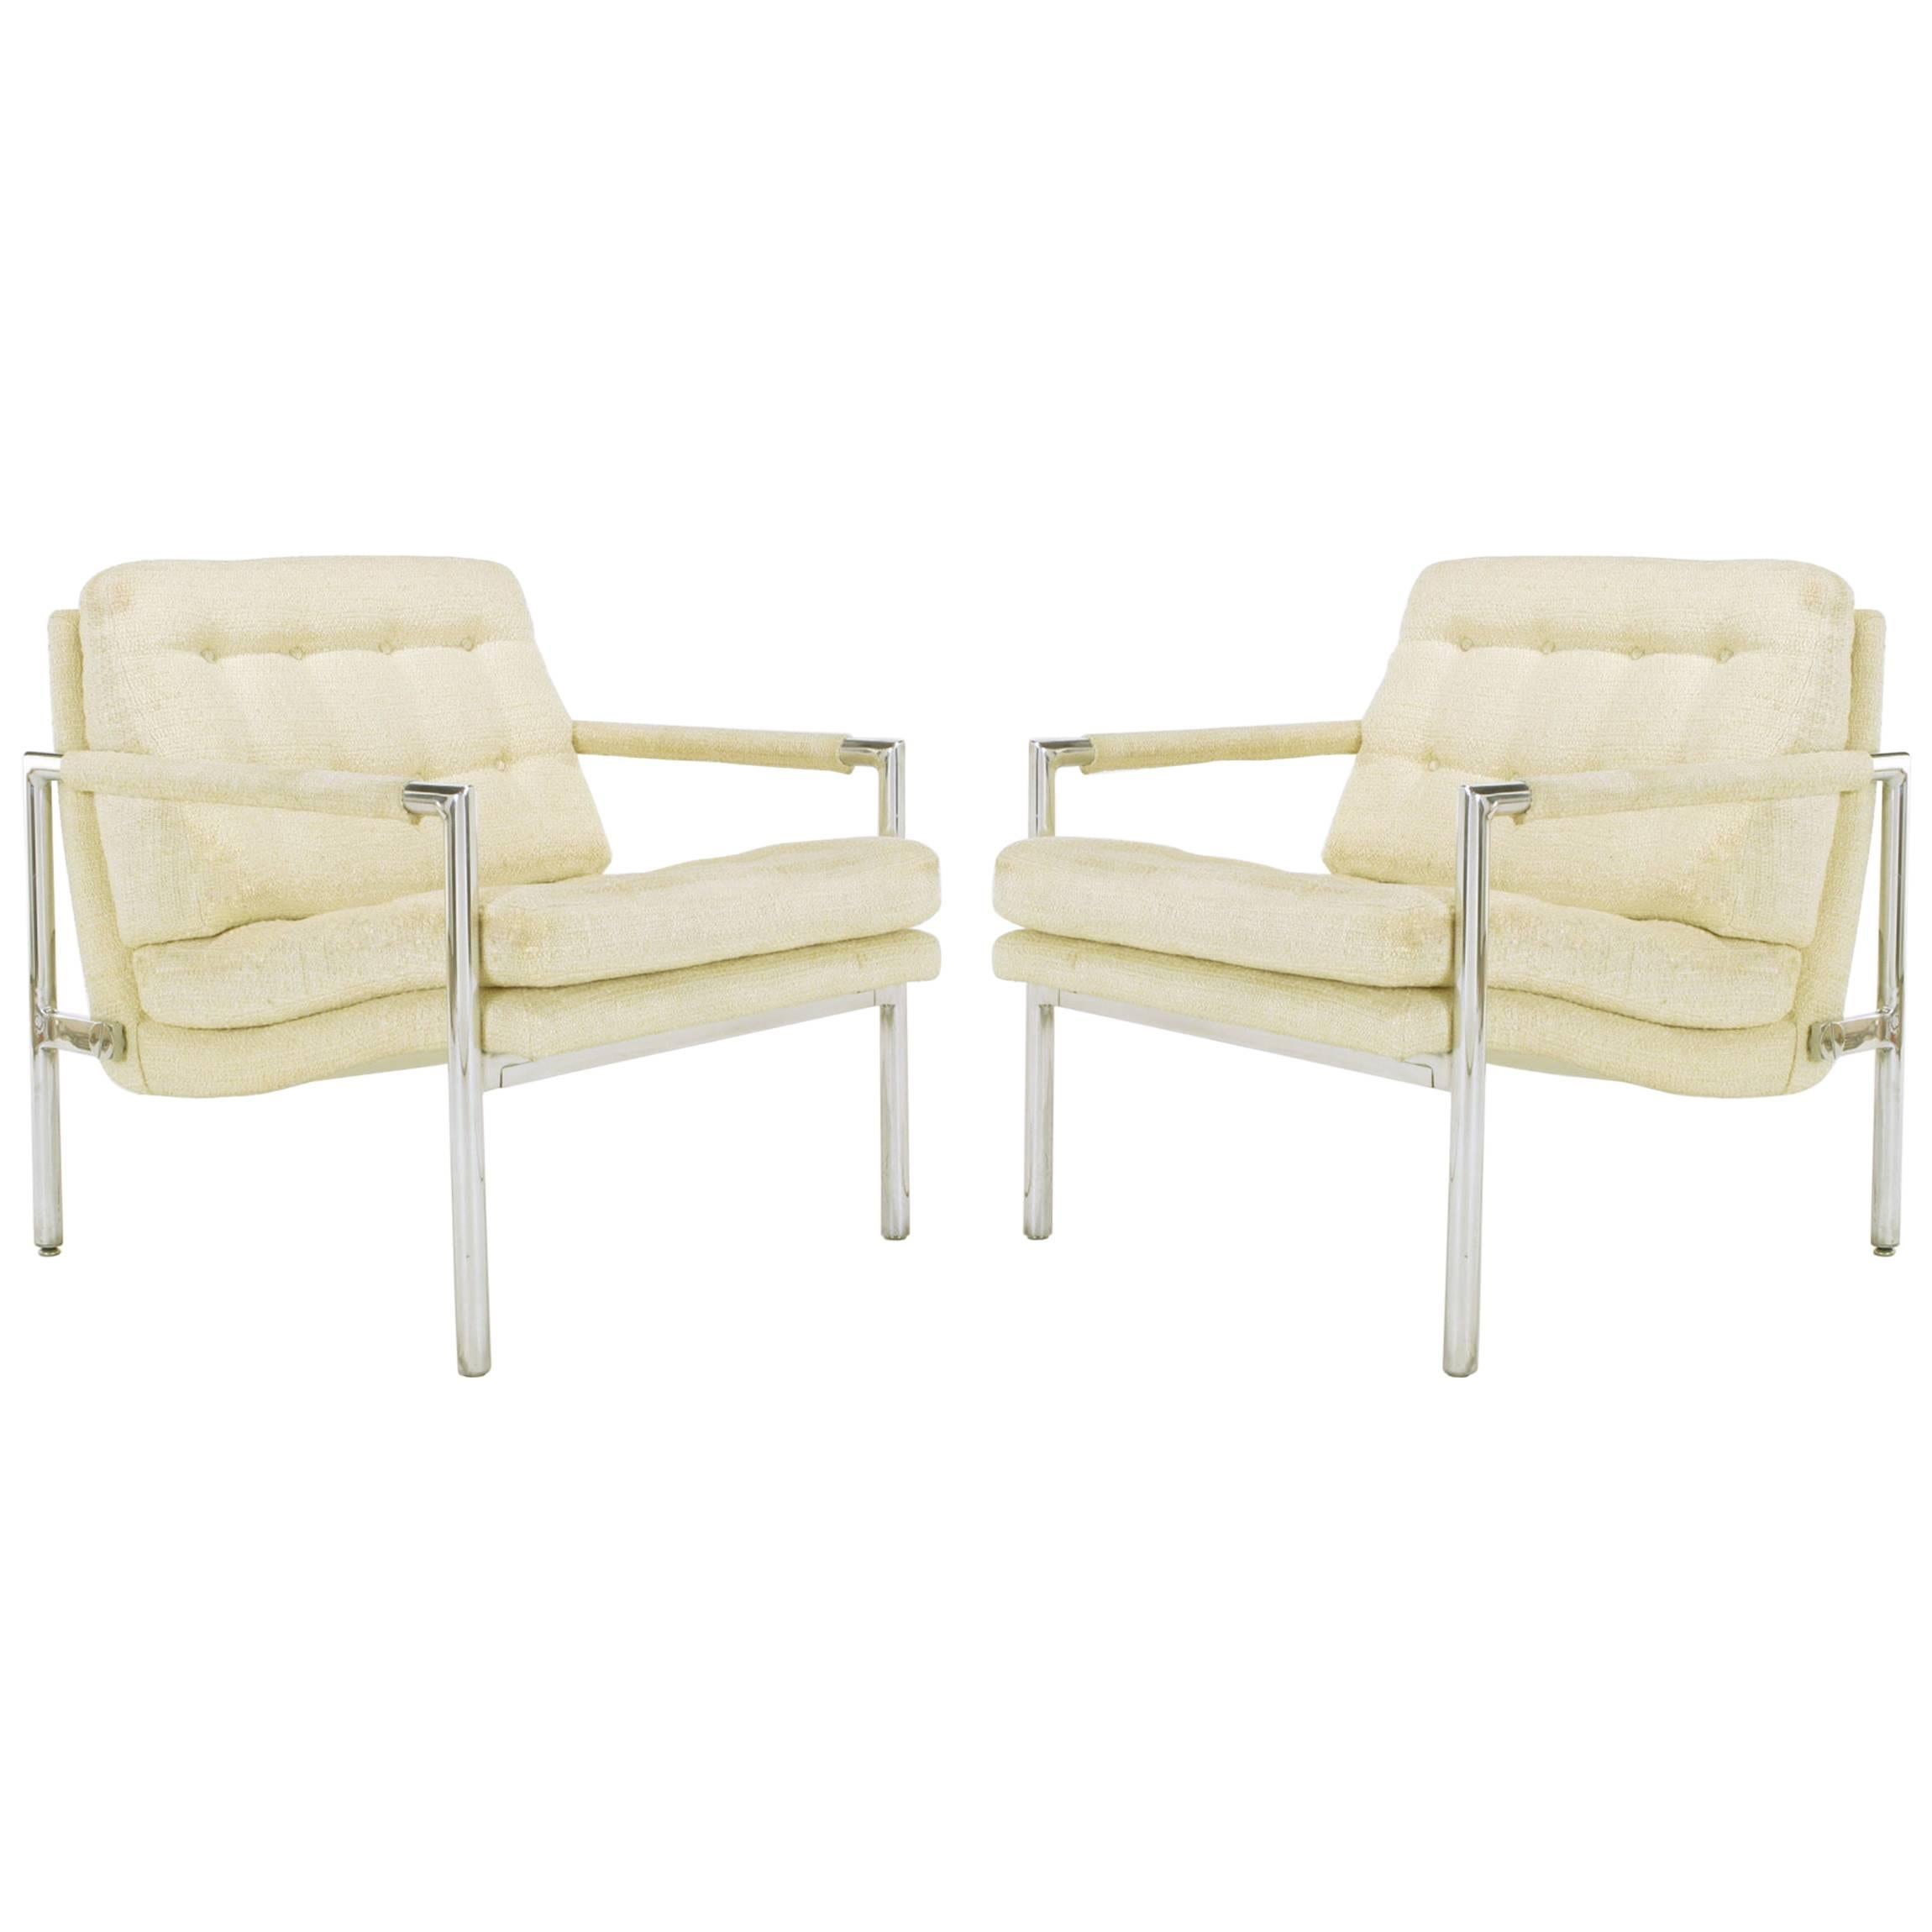 Pair of Polished Aluminum & Linen Lounge Chairs in the Manner of Harvey Probber